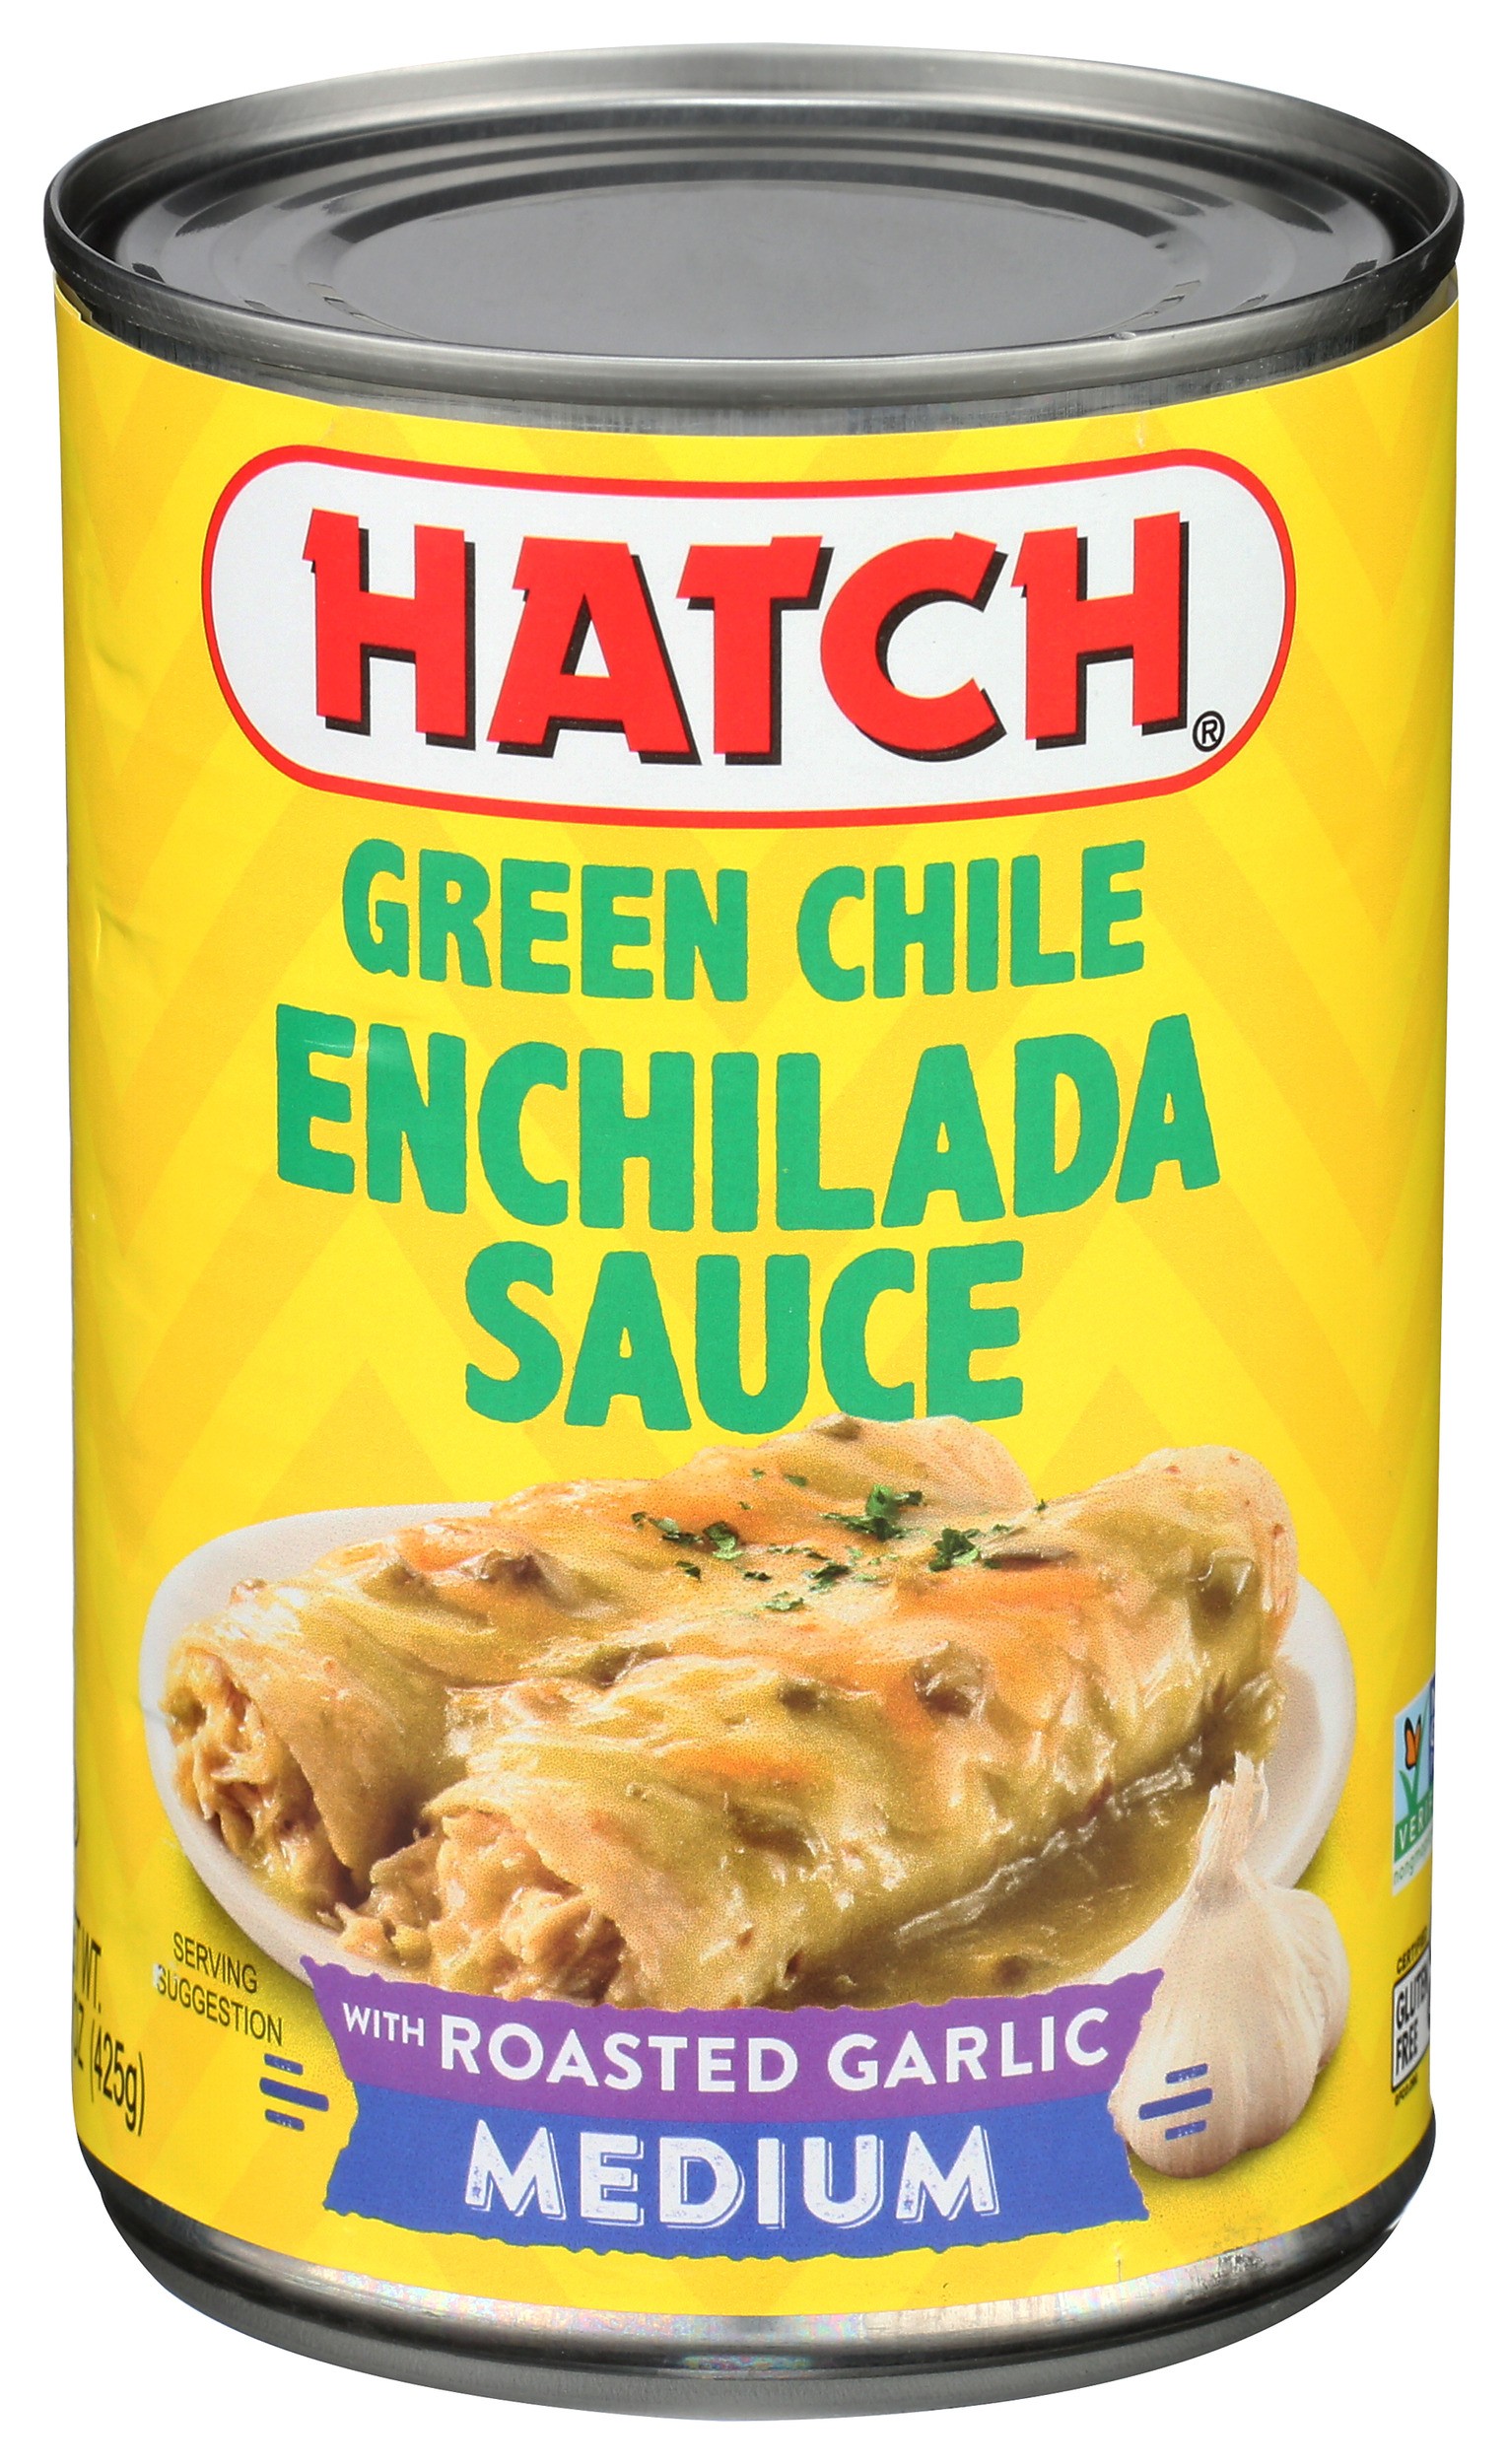 Featured image for post: Green Chile Enchilada Sauce with Roasted Garlic